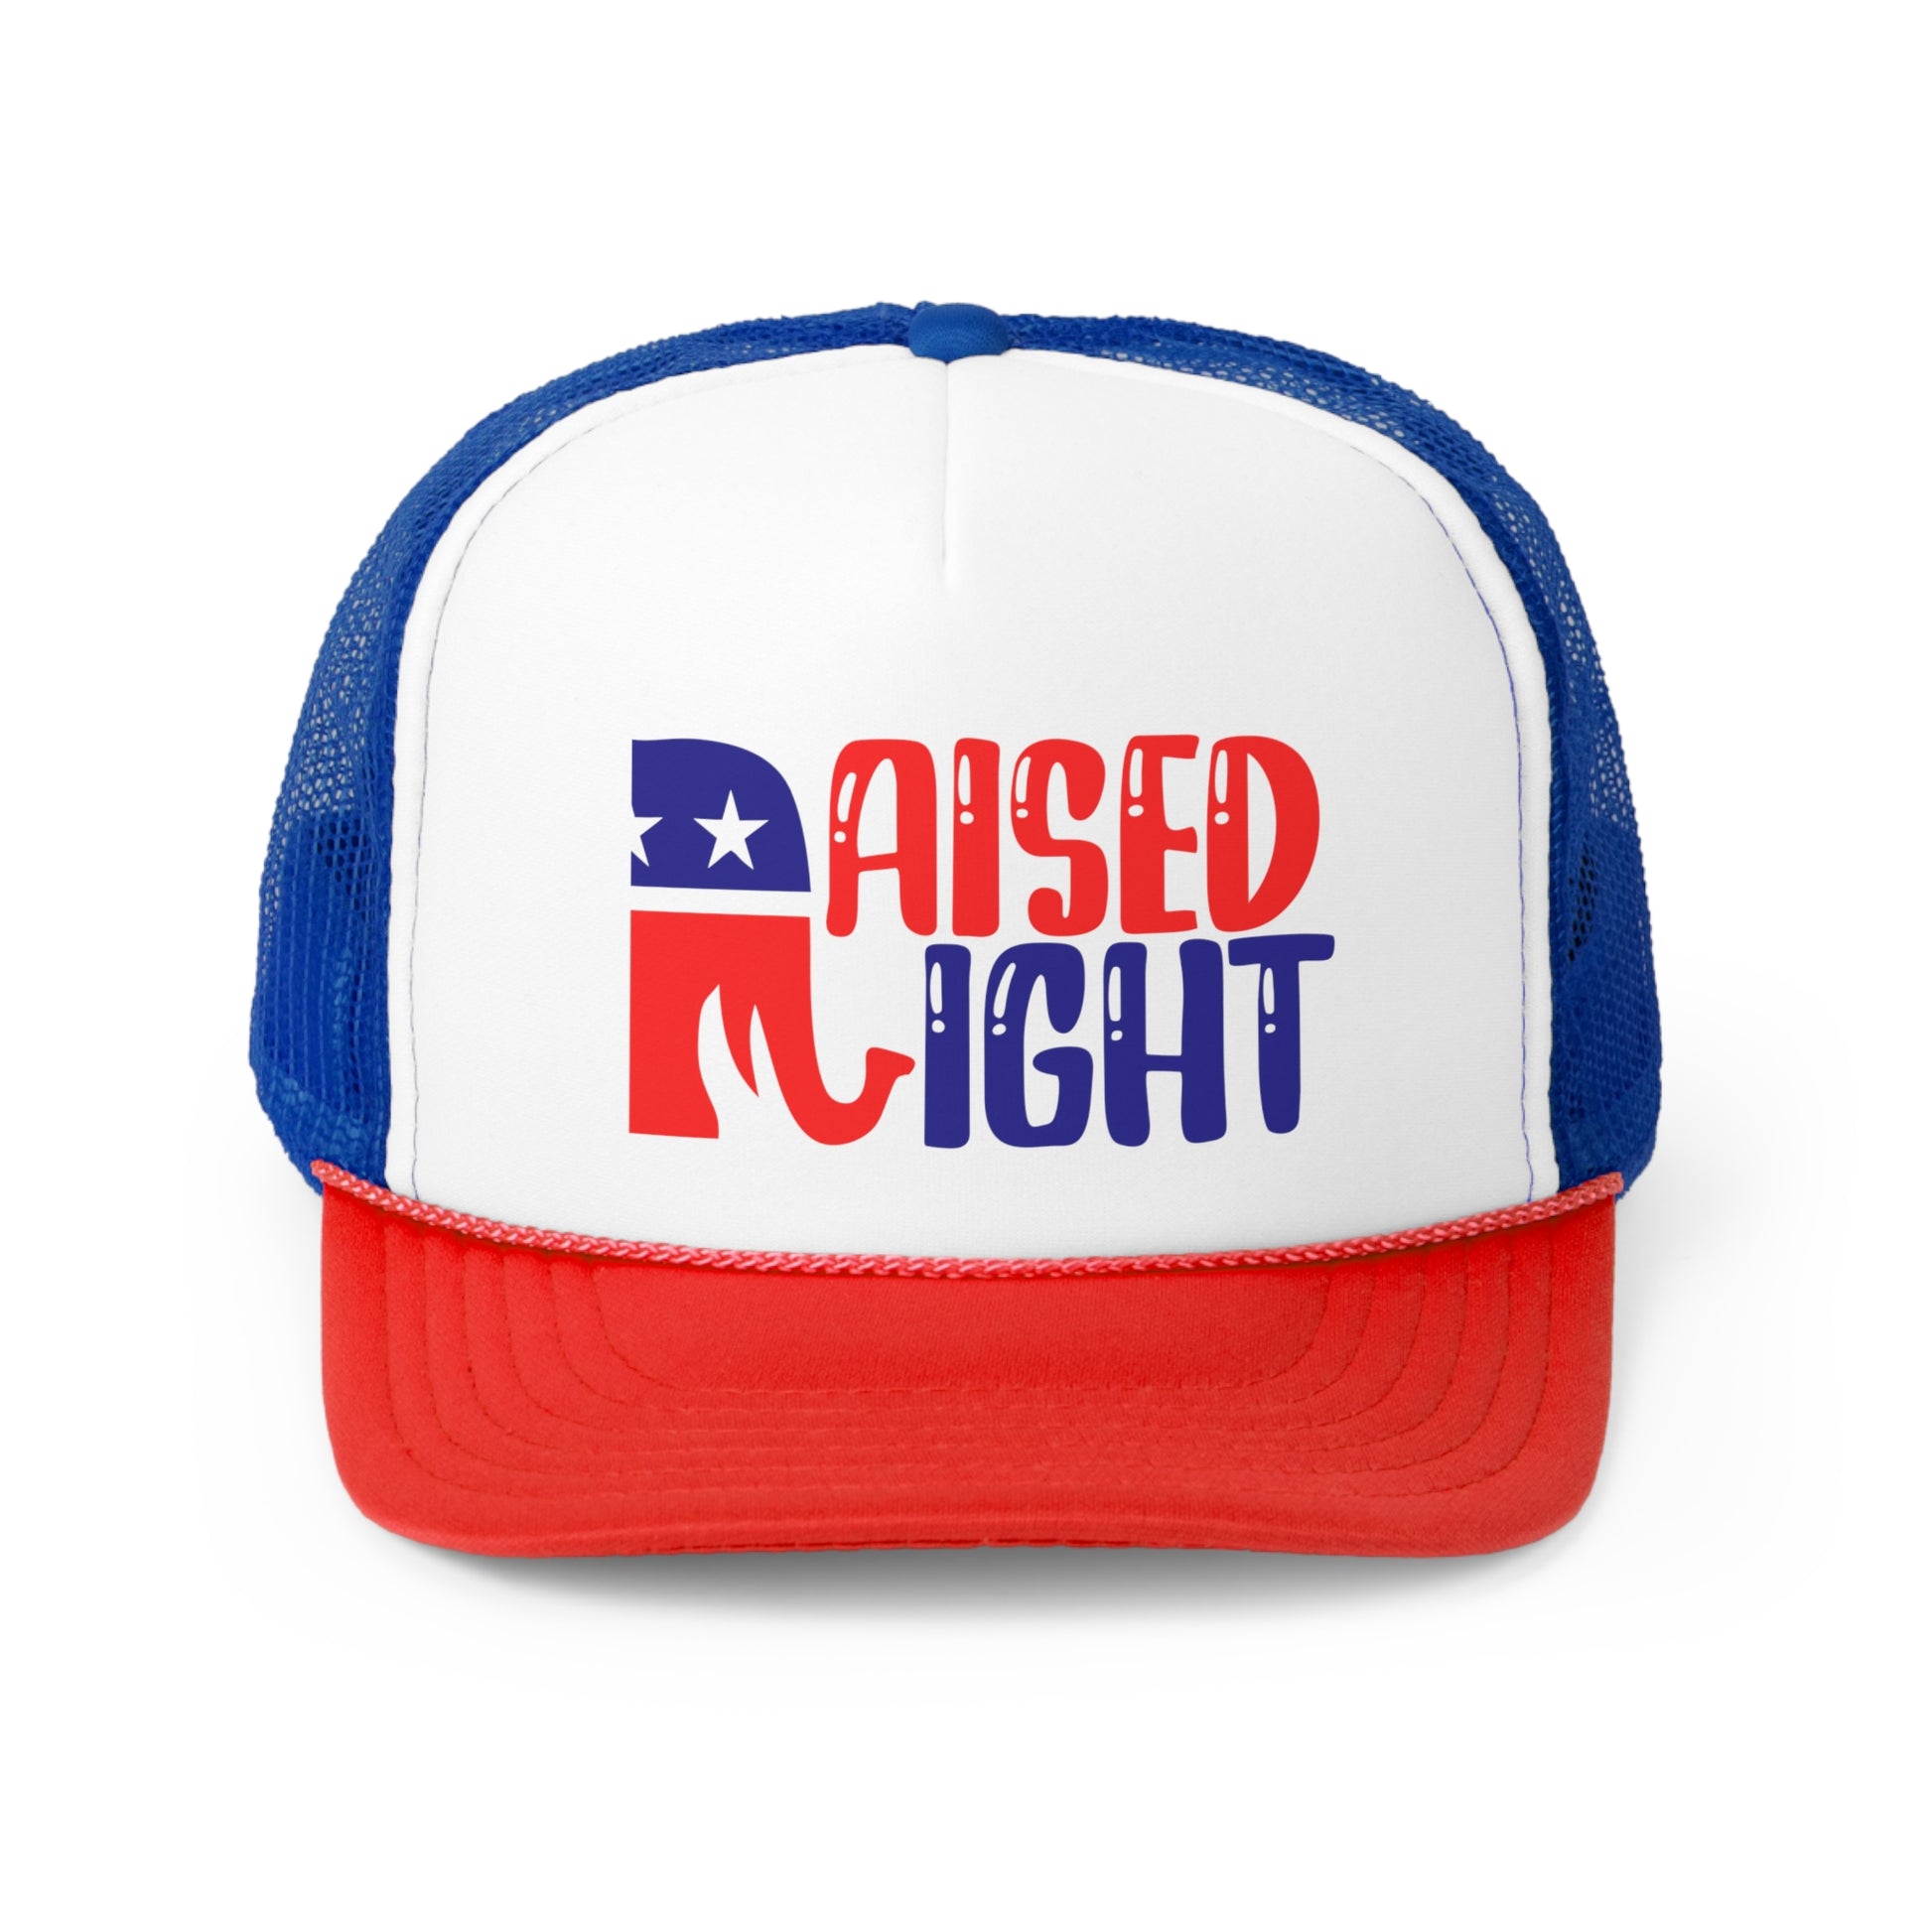 "Raised Right" Hat - Weave Got Gifts - Unique Gifts You Won’t Find Anywhere Else!